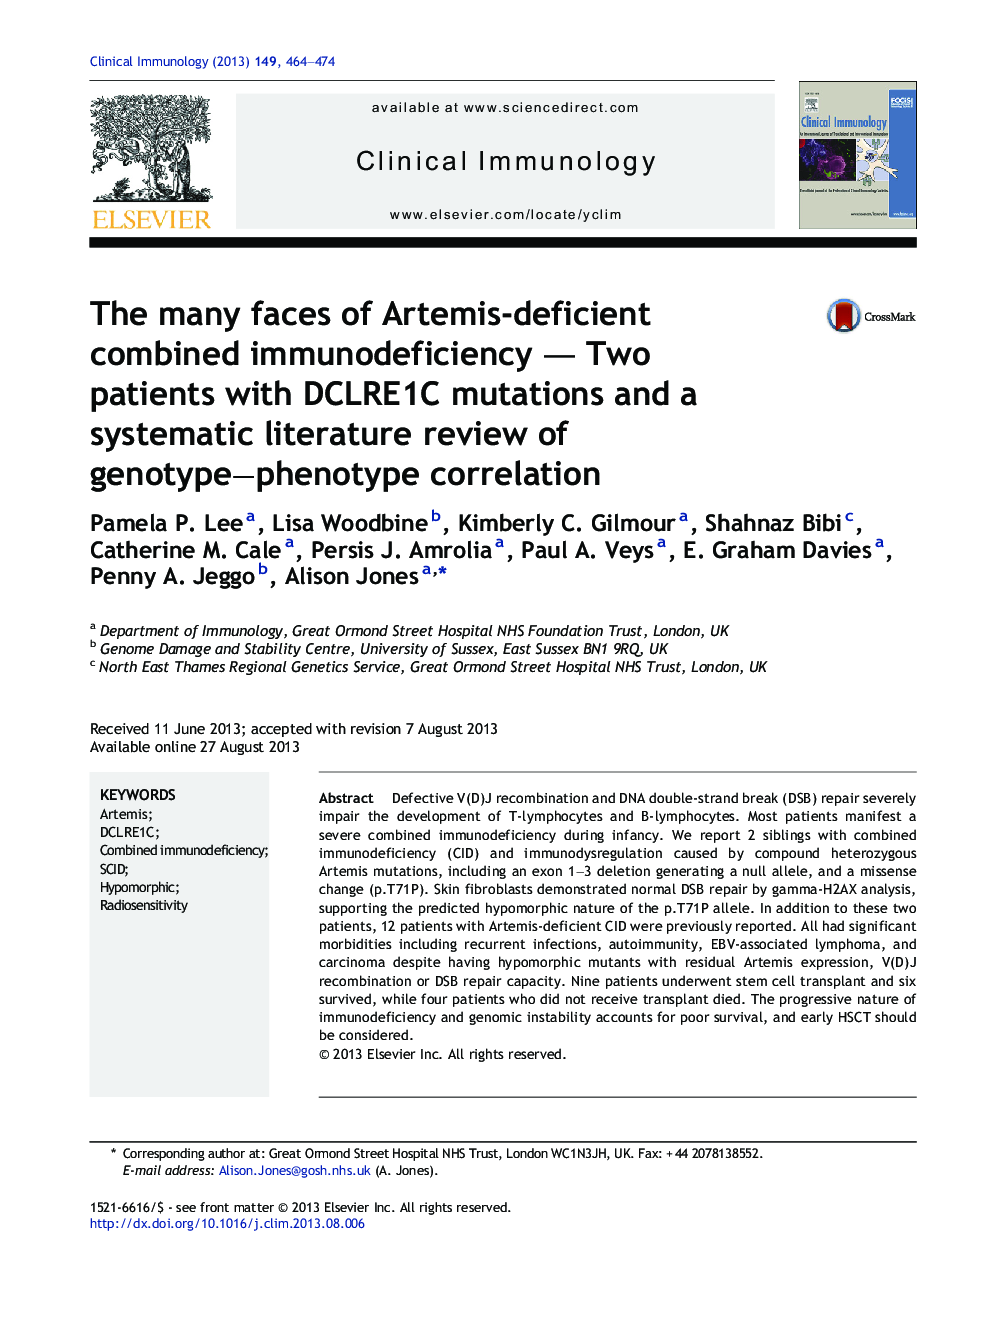 The many faces of Artemis-deficient combined immunodeficiency - Two patients with DCLRE1C mutations and a systematic literature review of genotype-phenotype correlation